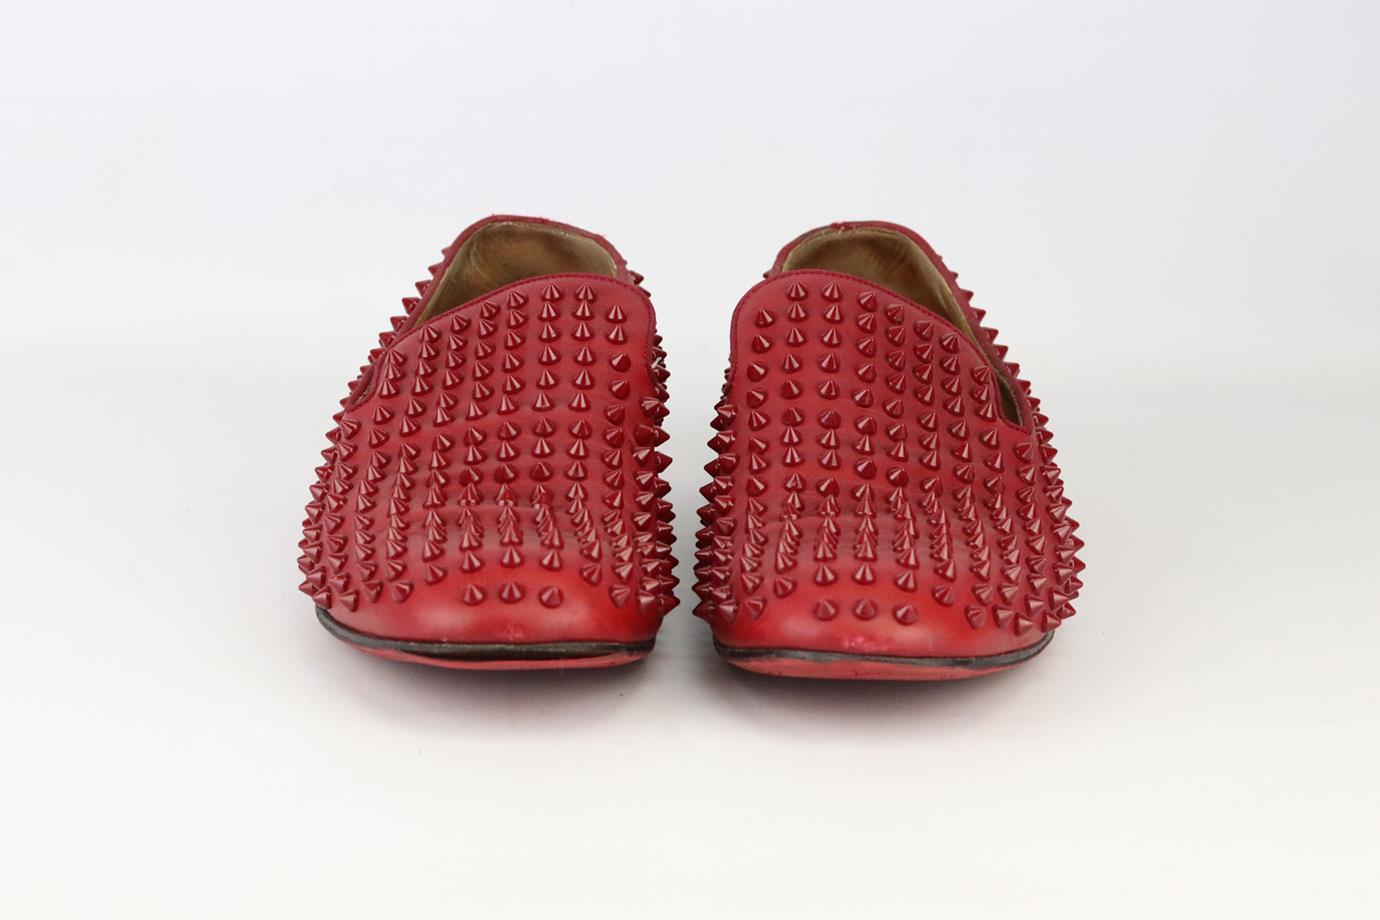 Christian Louboutin Dandelion spiked leather loafers. Made from red matte leather with glossy spikes throughout and set on the brand’s iconic red sole. Red. Slip on. Does not come with box or dustbag. Size: EU 43.5 (UK 9.5, US 10.5). Insole: 11.2